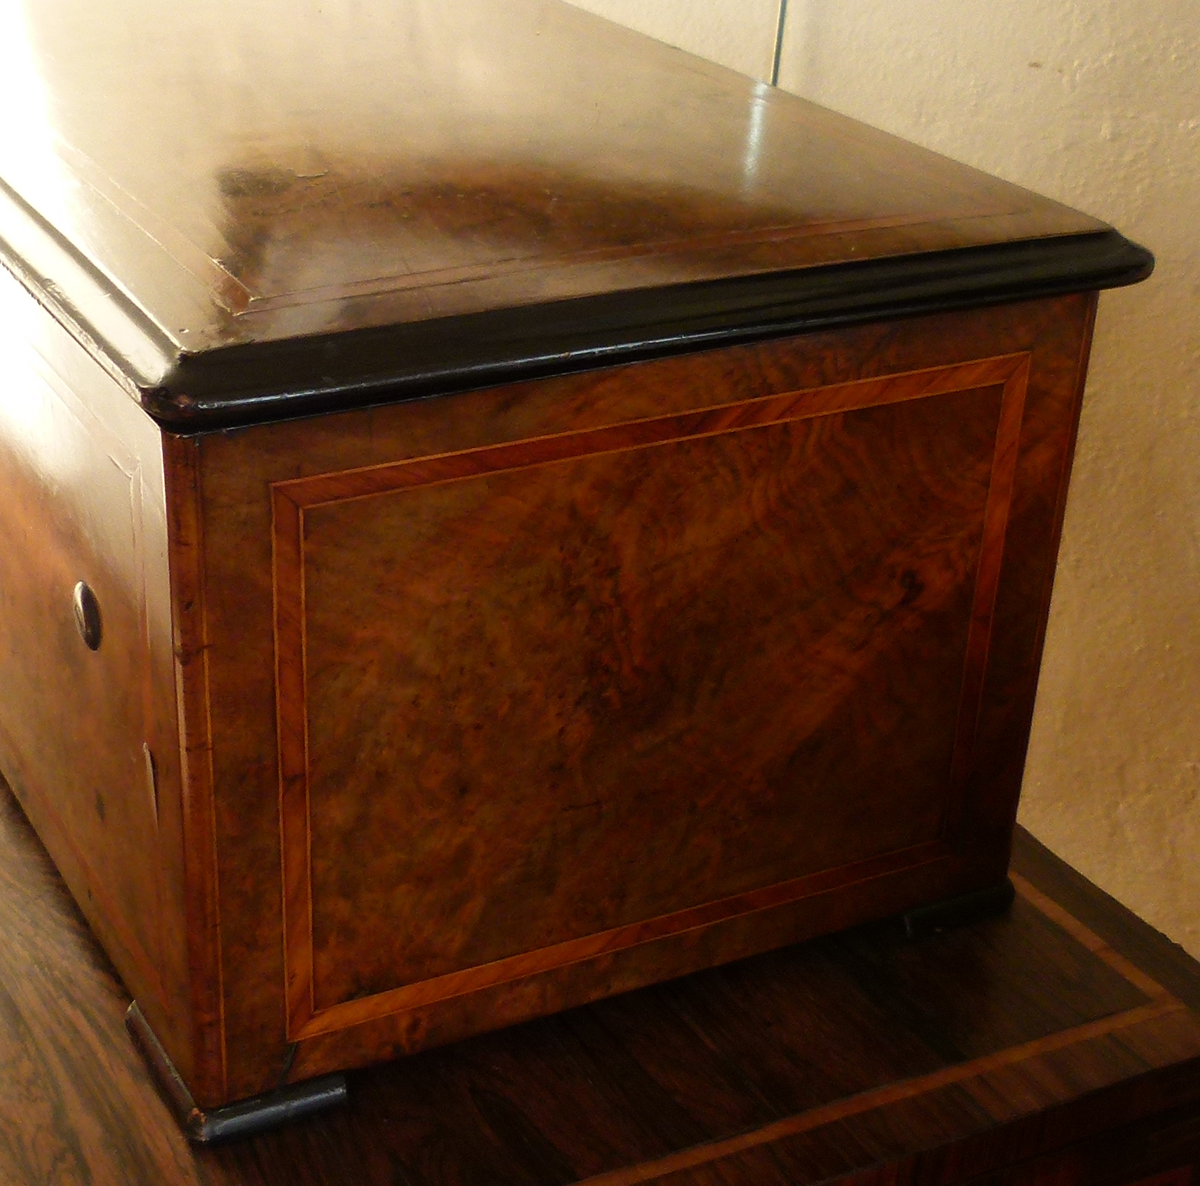 Swiss musical box circa 1870, the figured walnut case housing a 44cm barrel playing 12 airs on a - Image 6 of 13